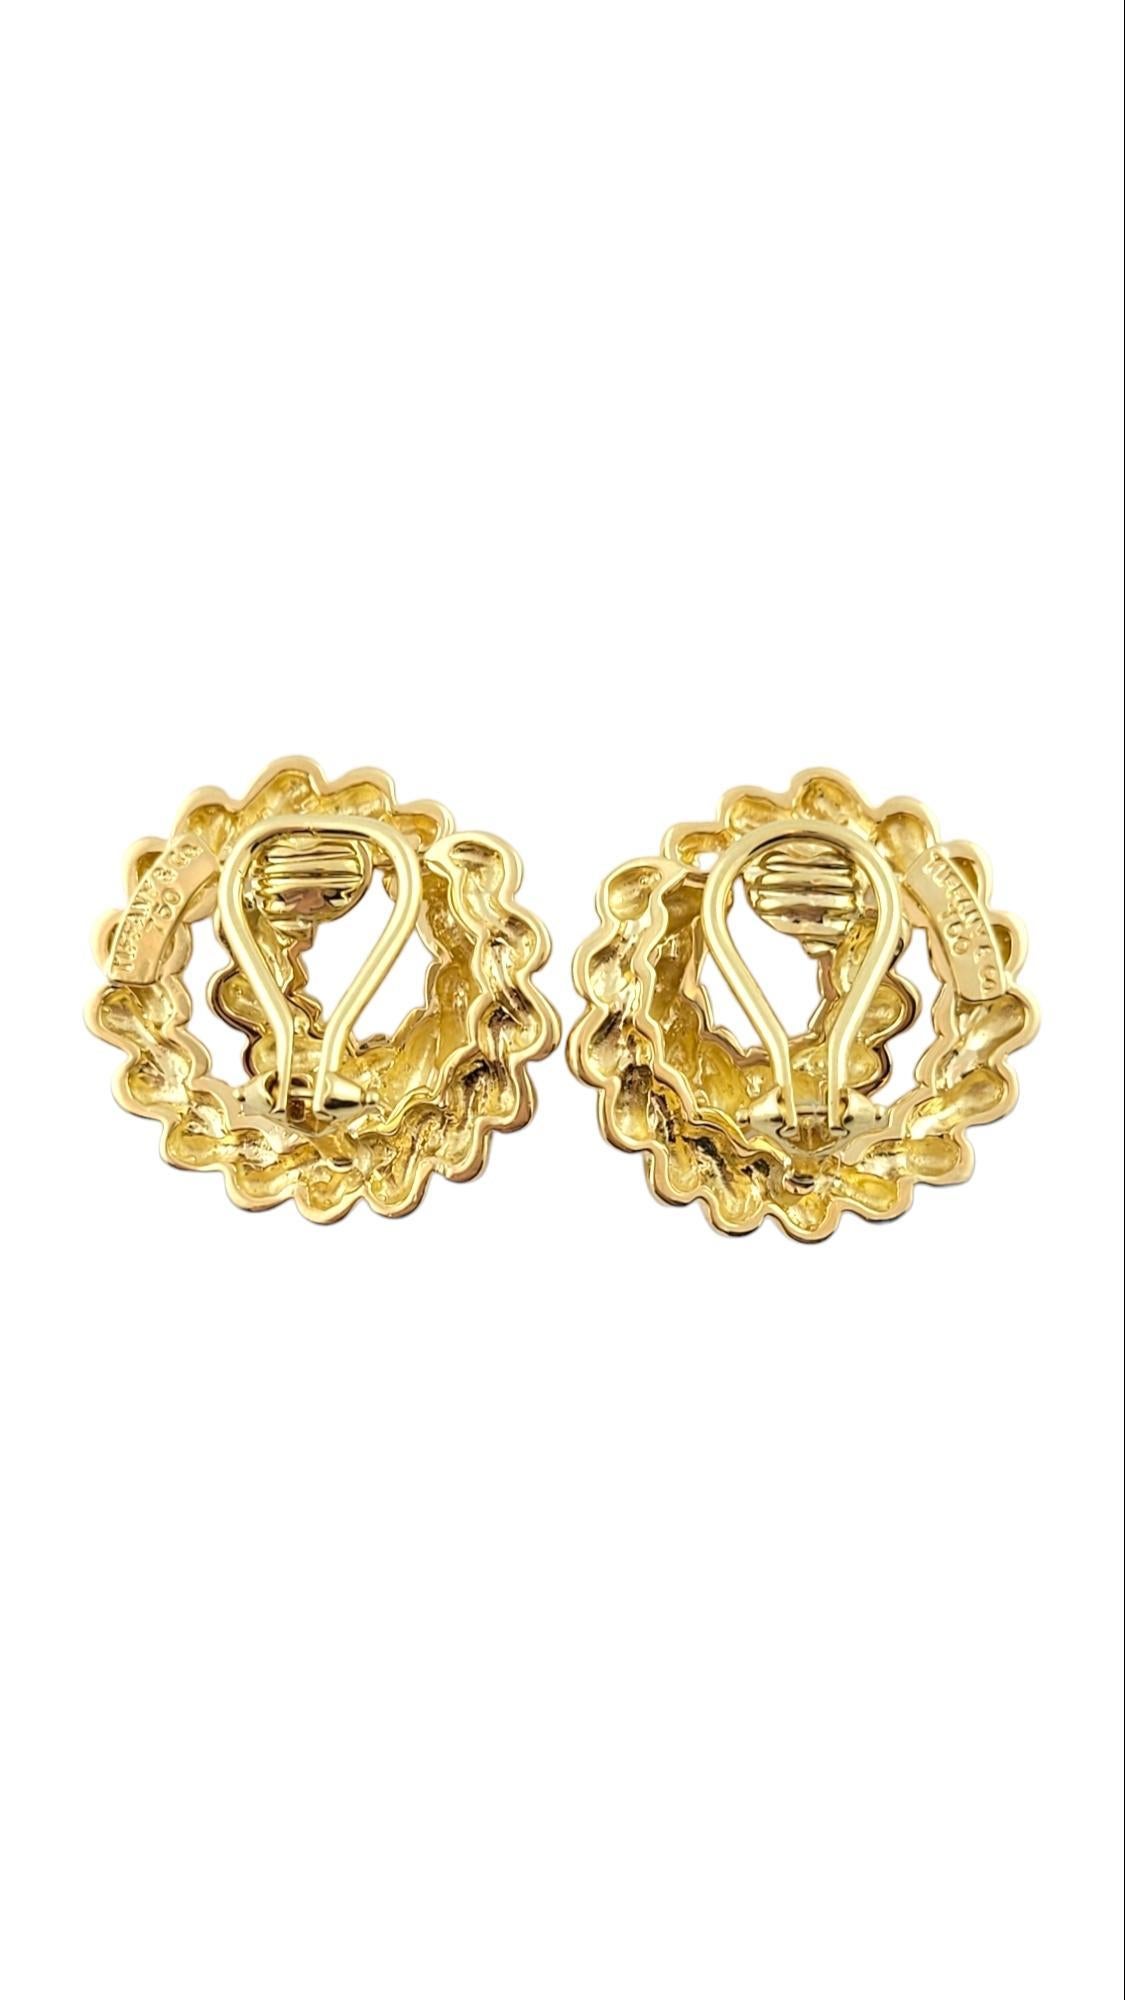 Tiffany & Co. 18K Yellow Gold Coiled Rope Clip on Earrings #15836 In Good Condition For Sale In Washington Depot, CT